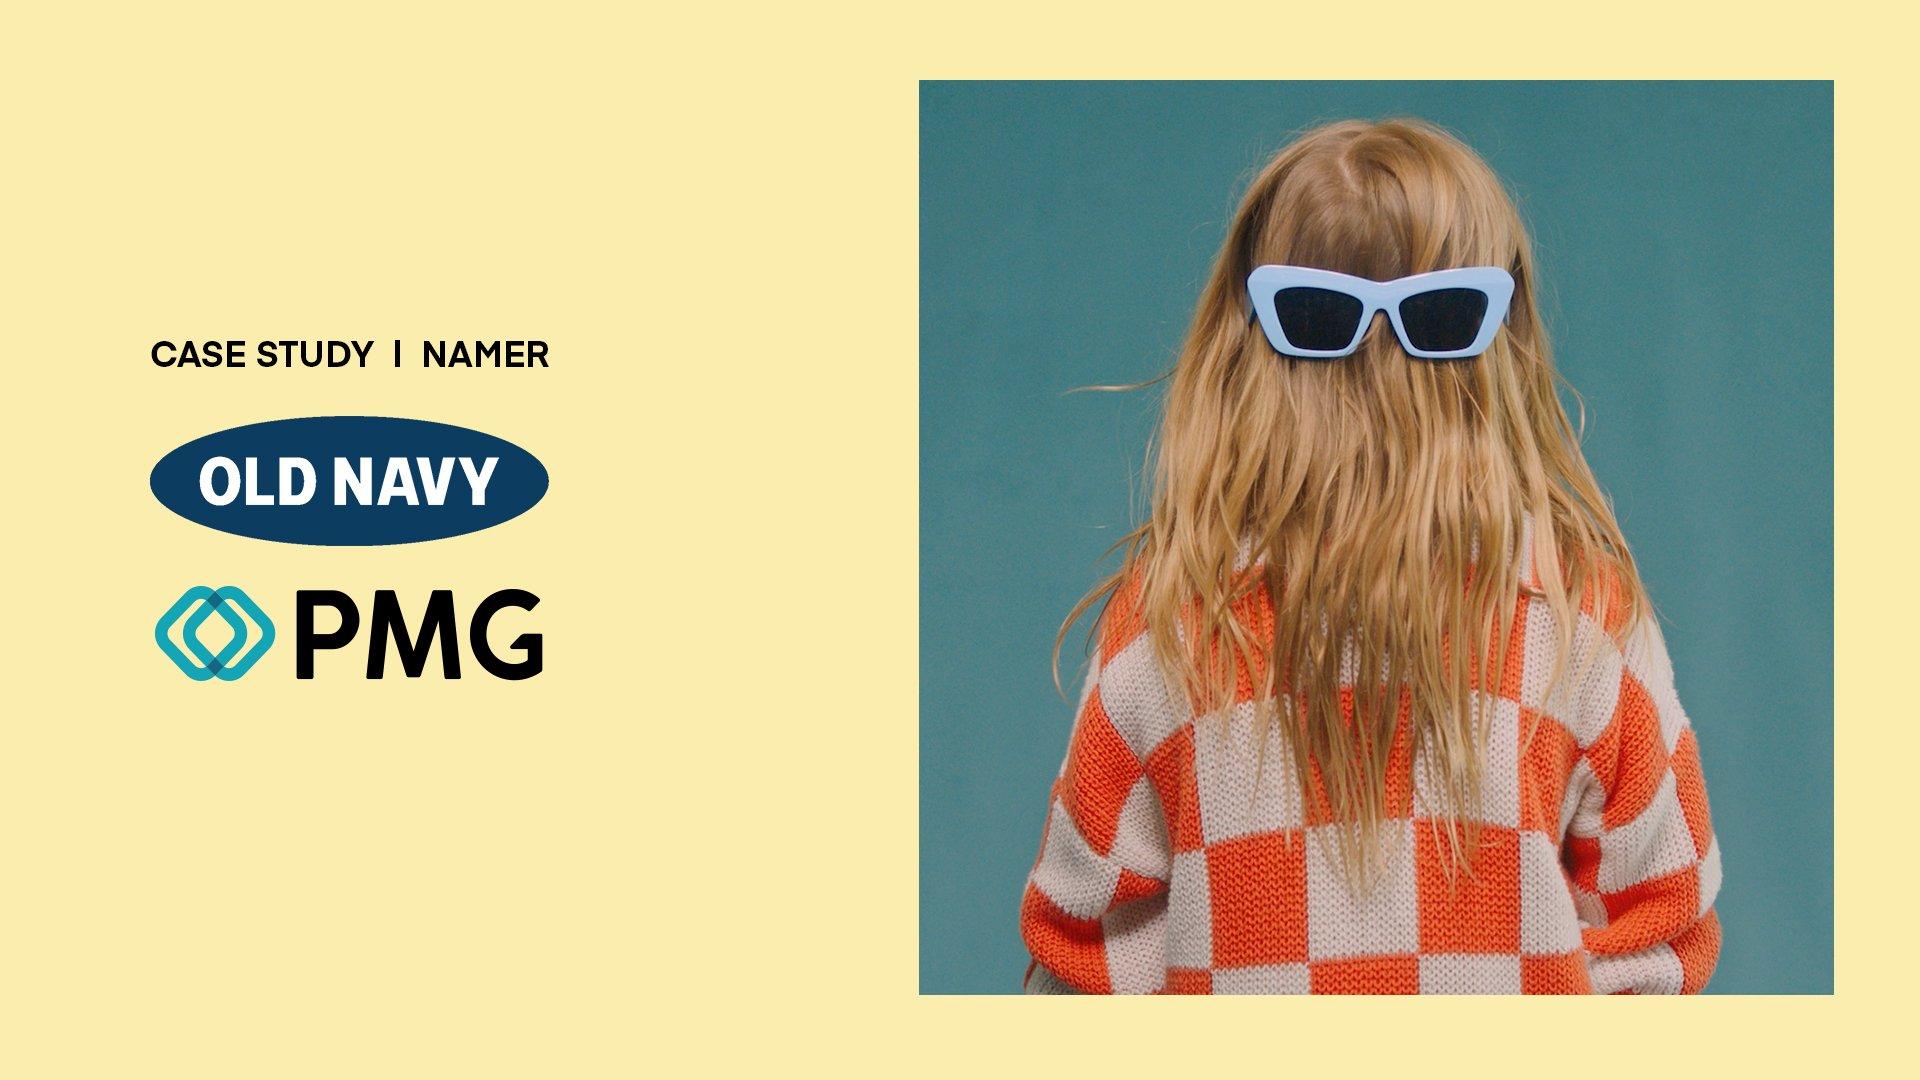 Yellow background with back-to-school campaign image from Old Navy + PMG case study